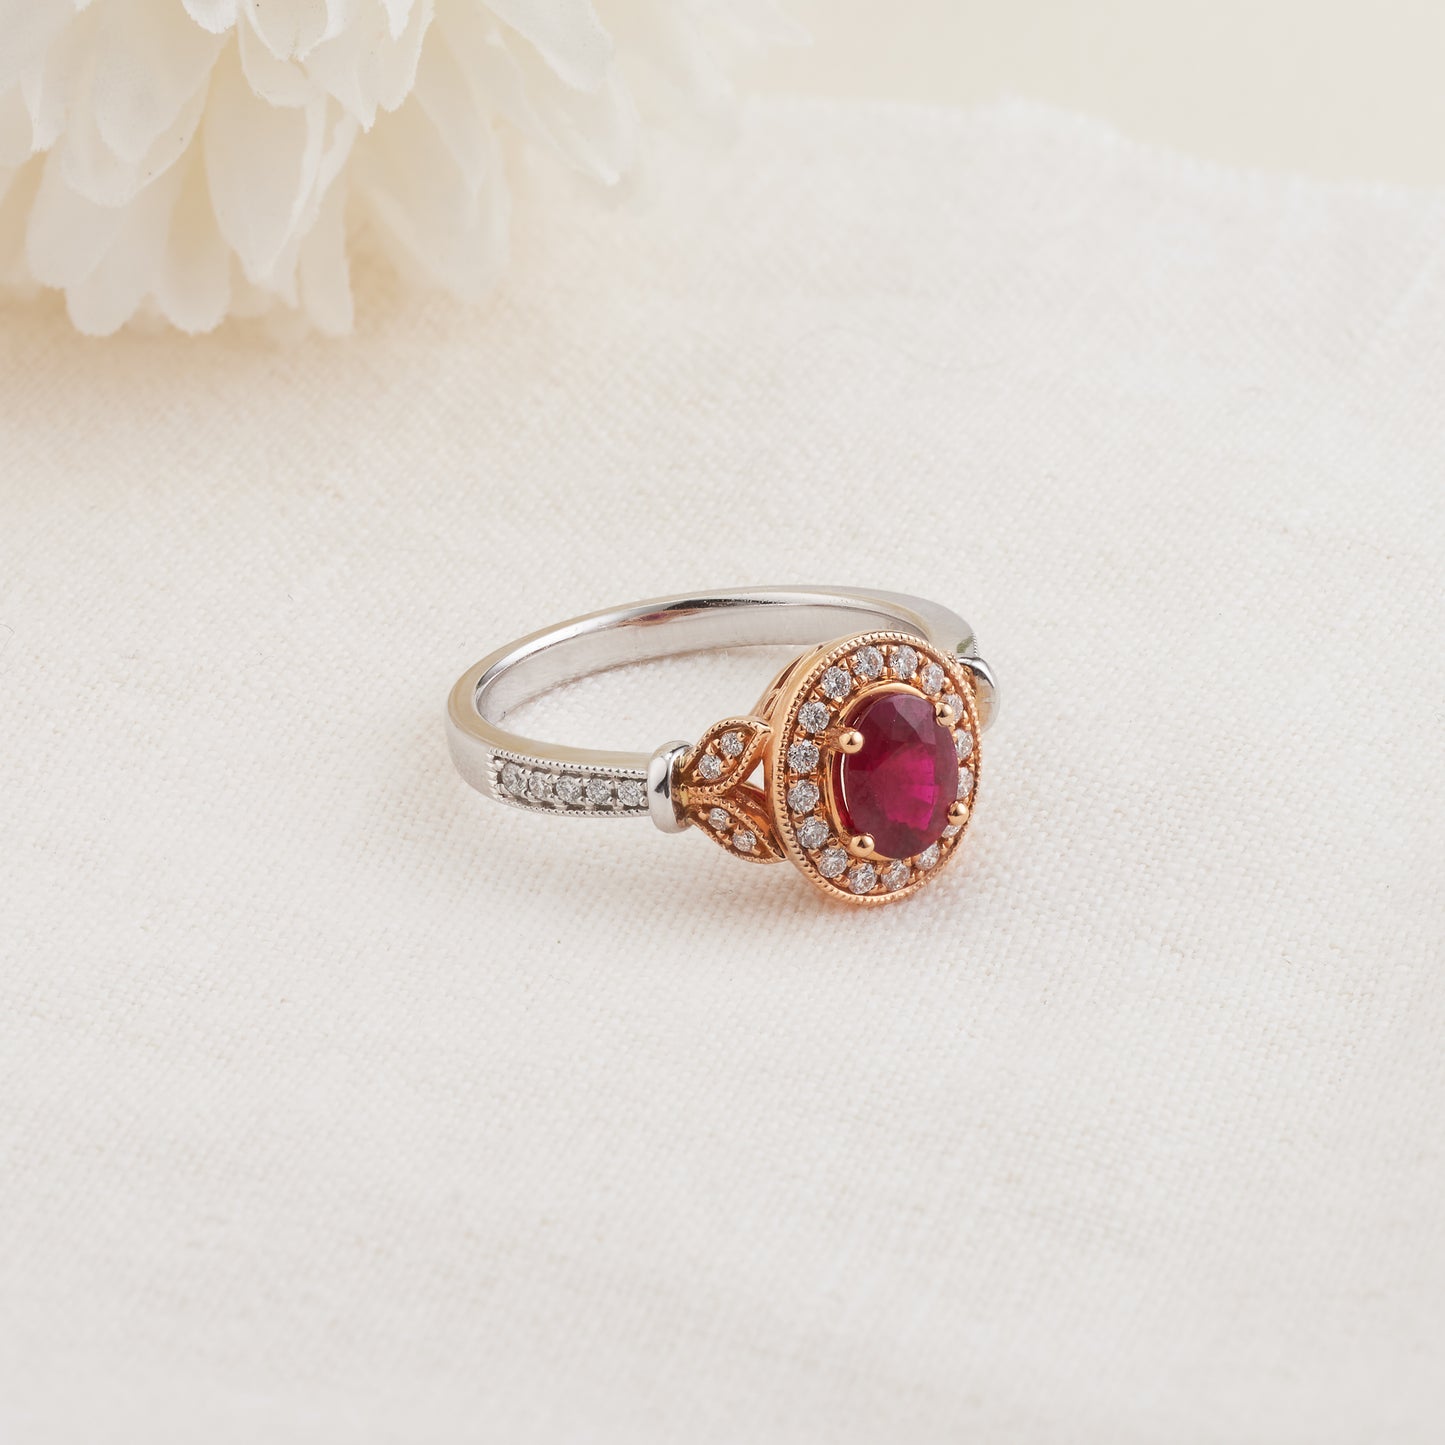 18K White and Rose Gold Oval Ruby Diamond Halo Vintage Inspired Ring 0.25tdw